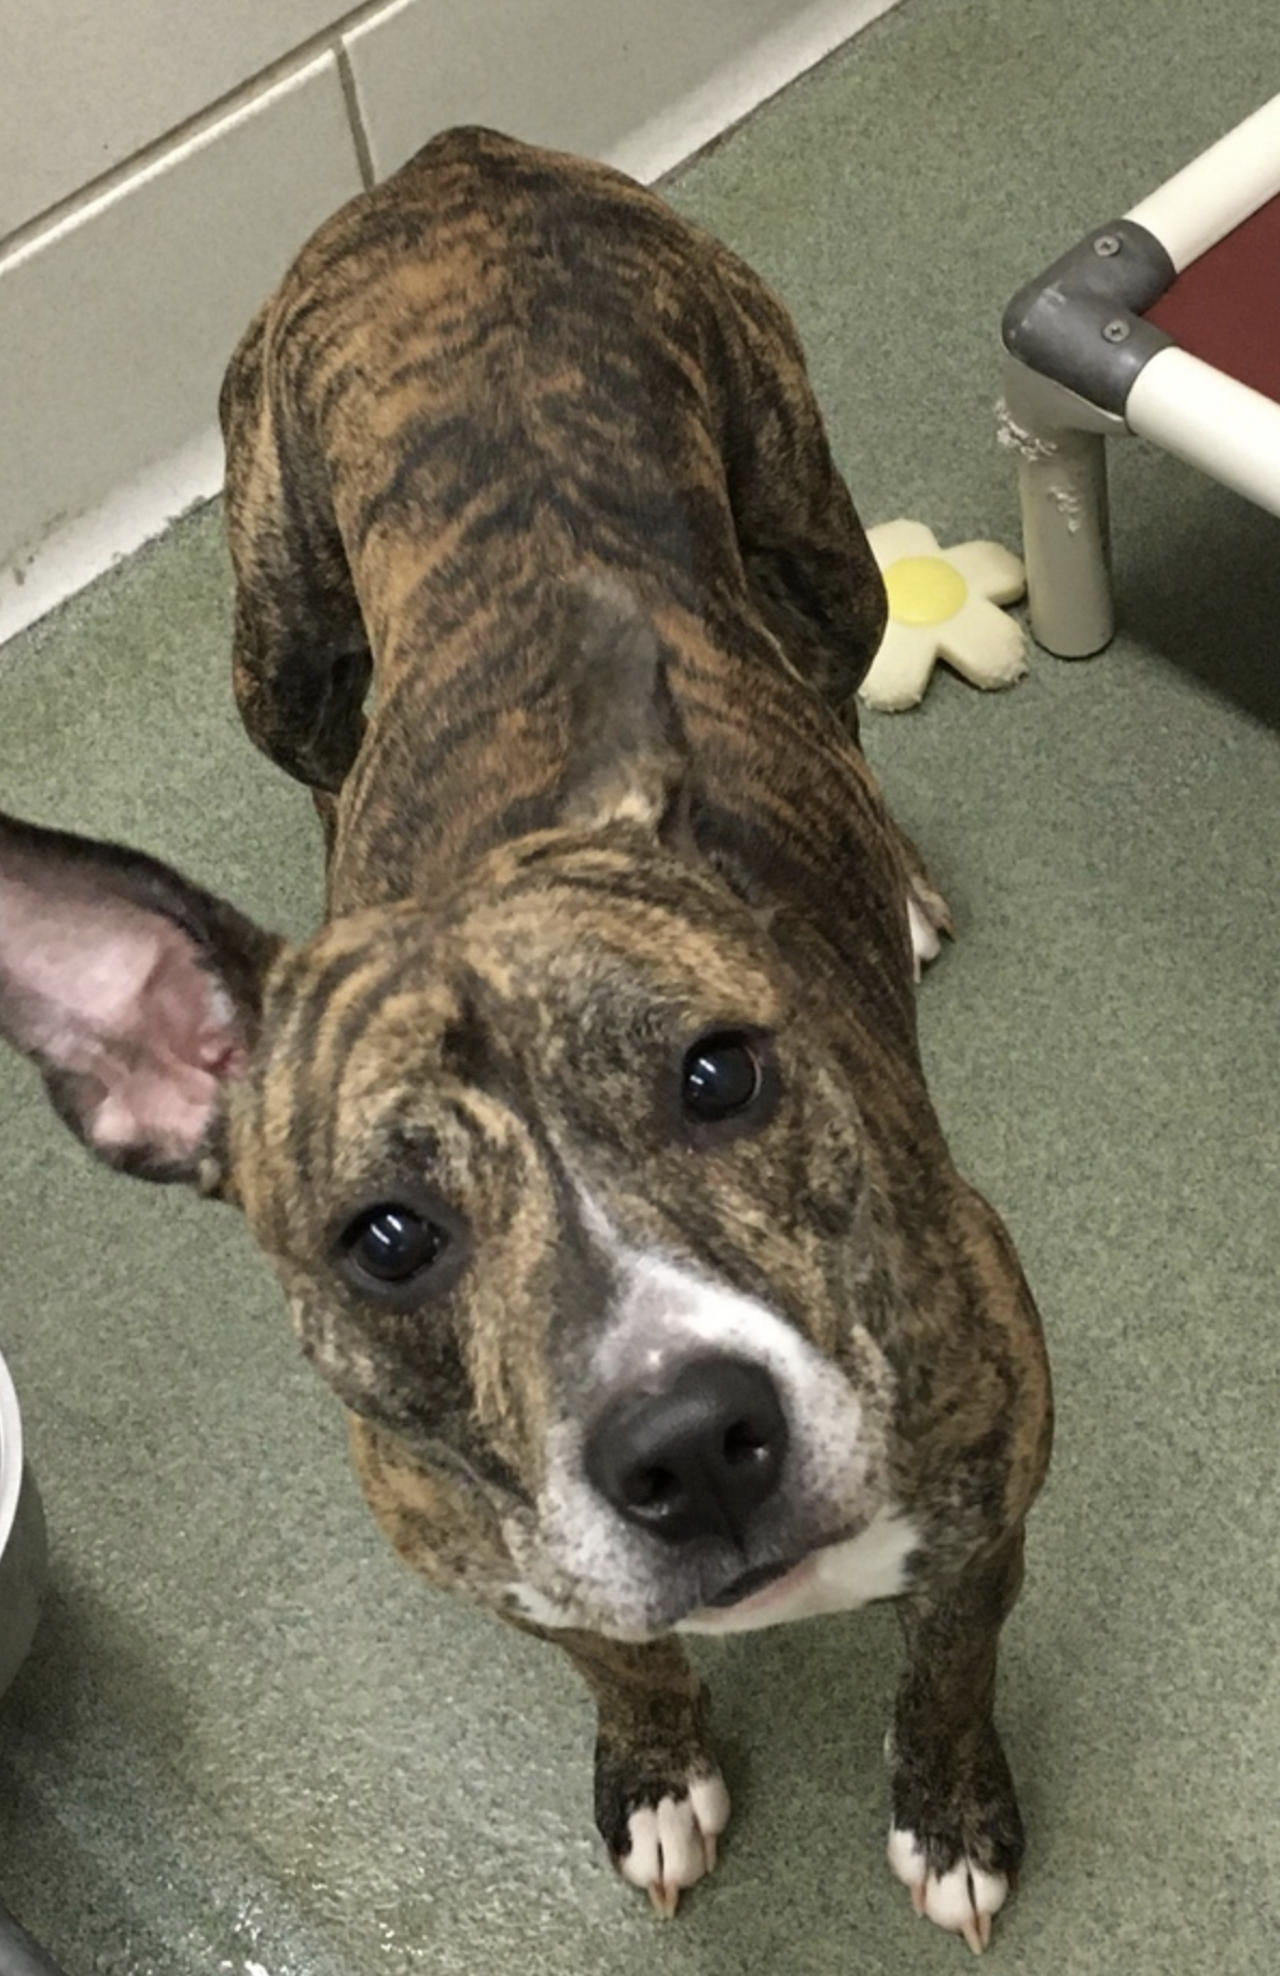 Pippi
Age: 2 years old / Breed: American Pit Bull Cross / Sex: Female 
Pipi is a precious brindle pit bull mix who is healthy, up-to-date on her vaccines and spayed.